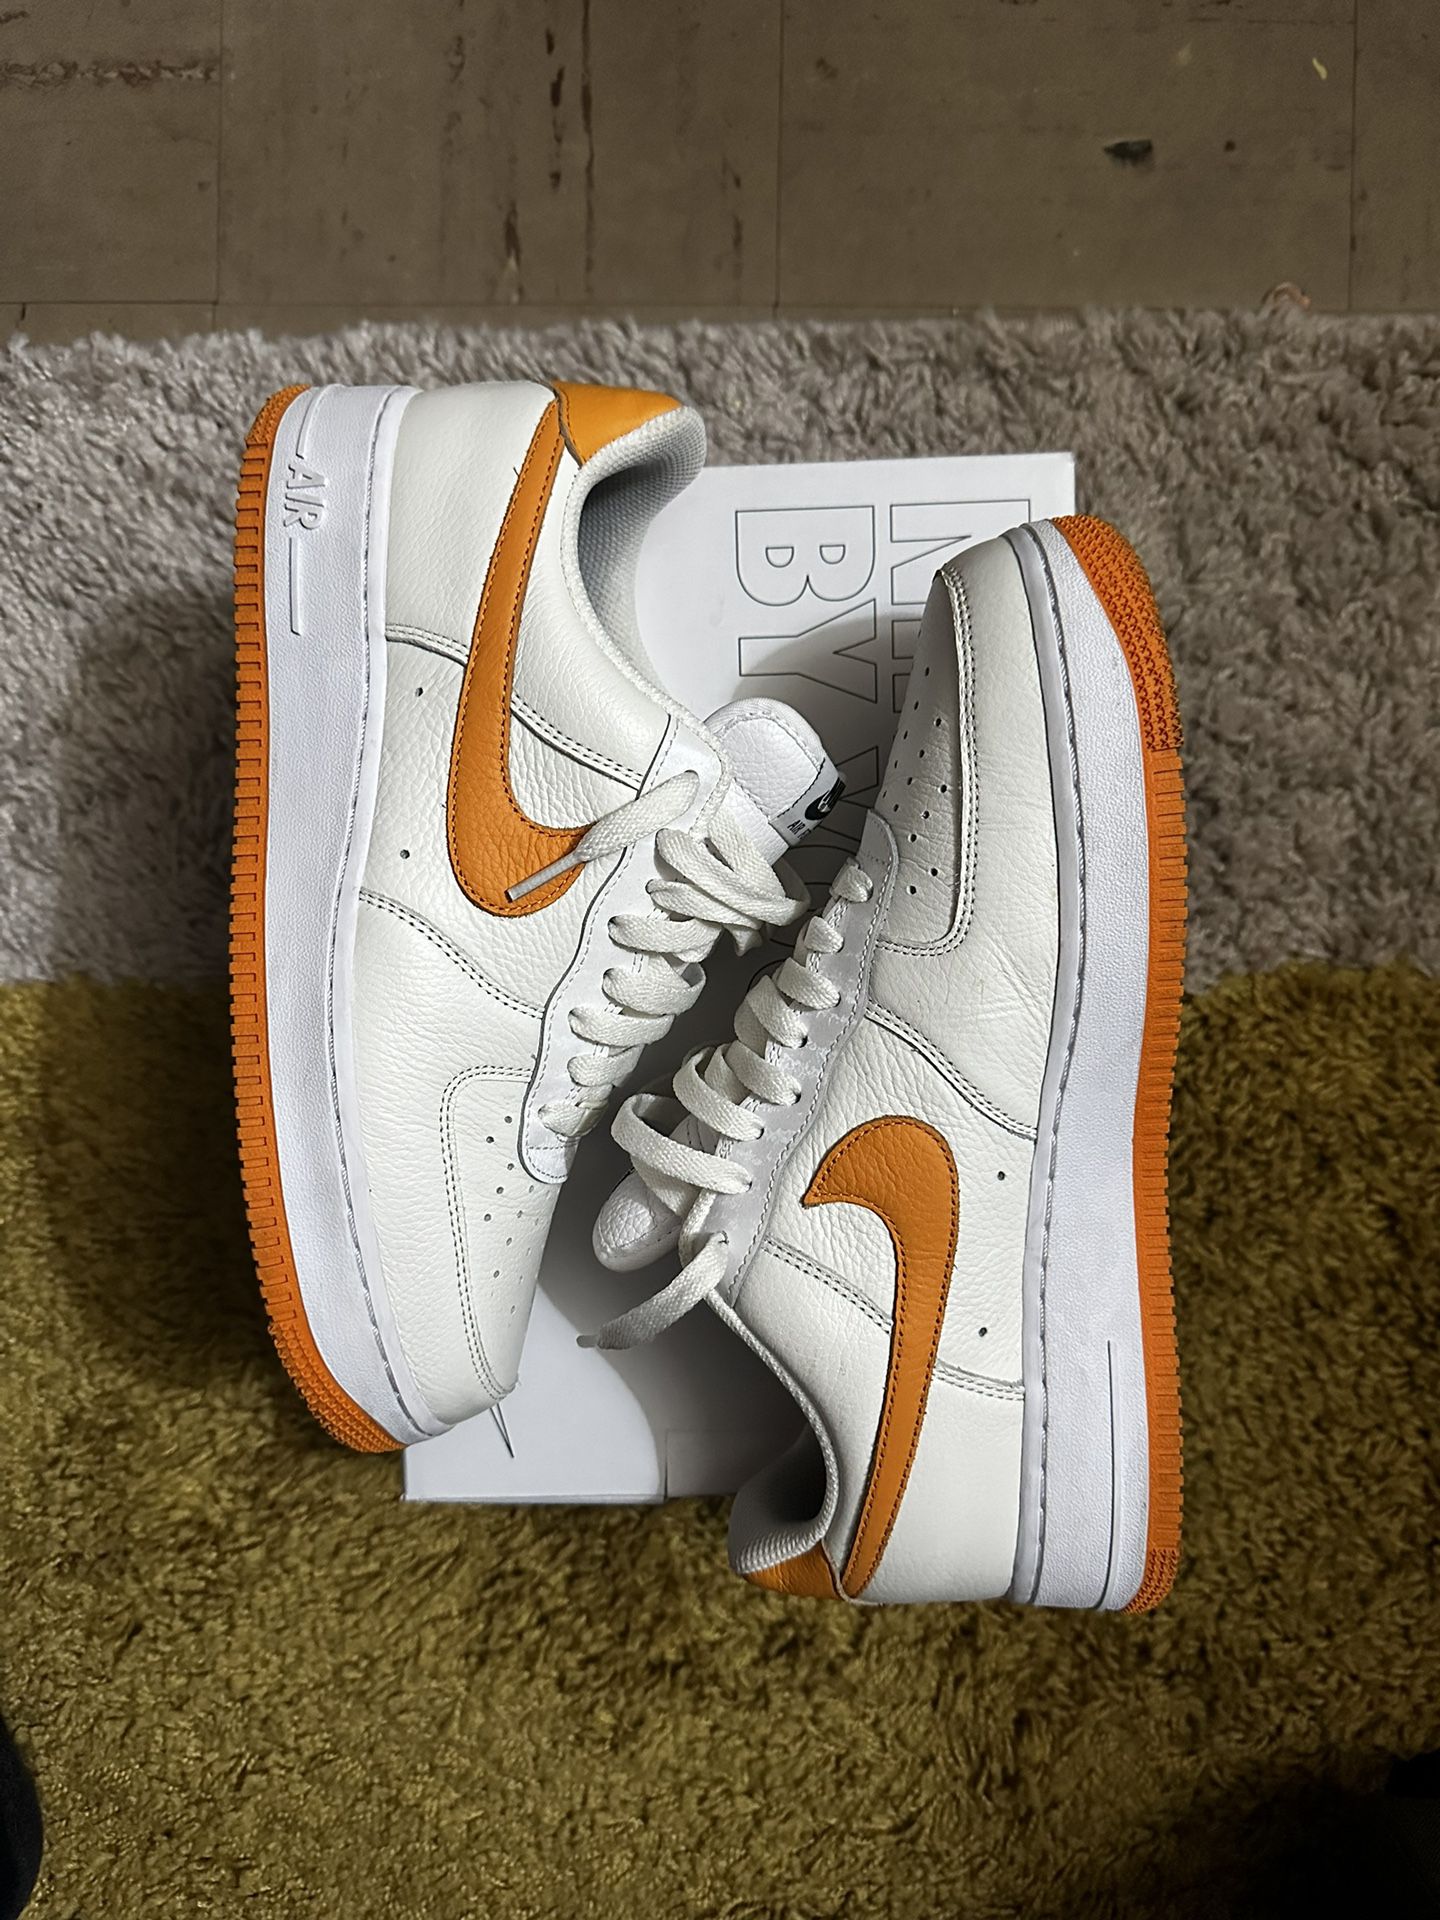 Nike Air Force One Anniversary Edition for Sale in New York, NY - OfferUp